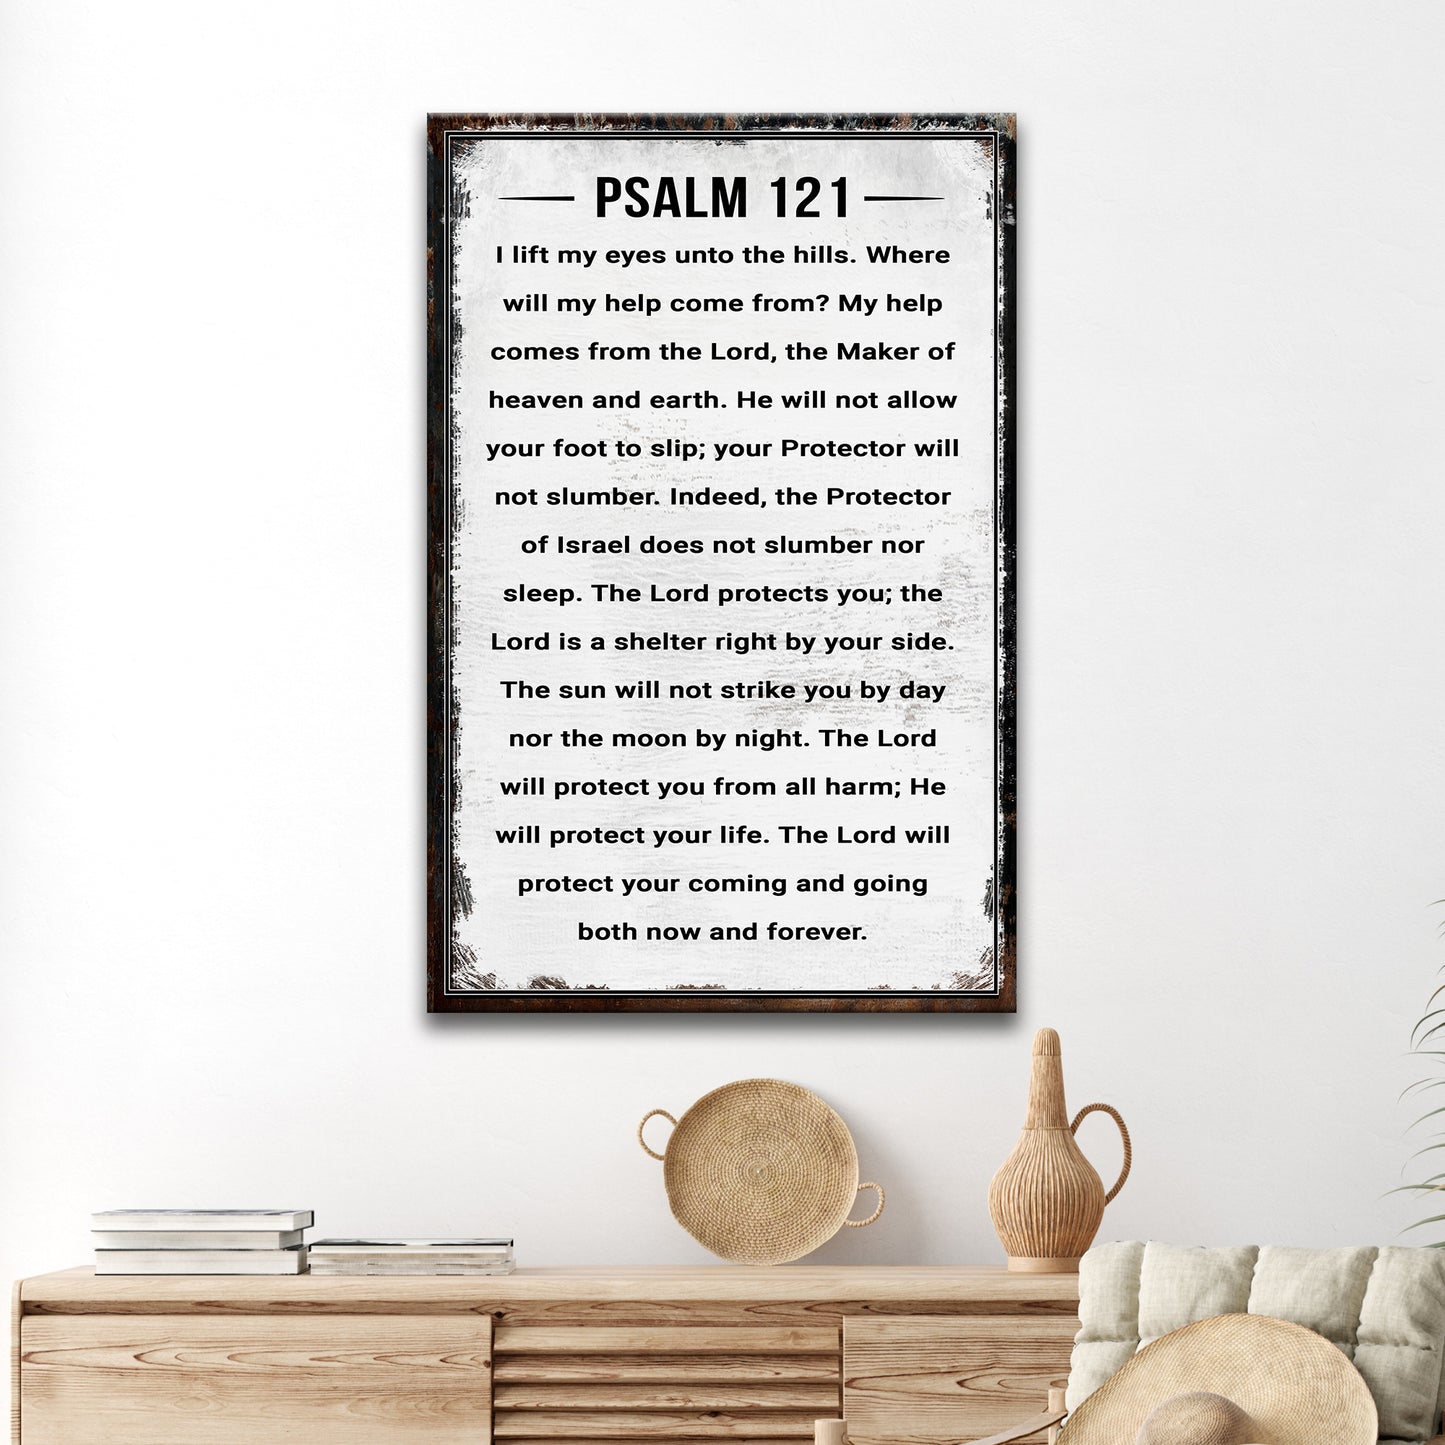 Psalm 121 - I Lift My Eyes Unto The Hills Sign - Image by Tailored Canvases